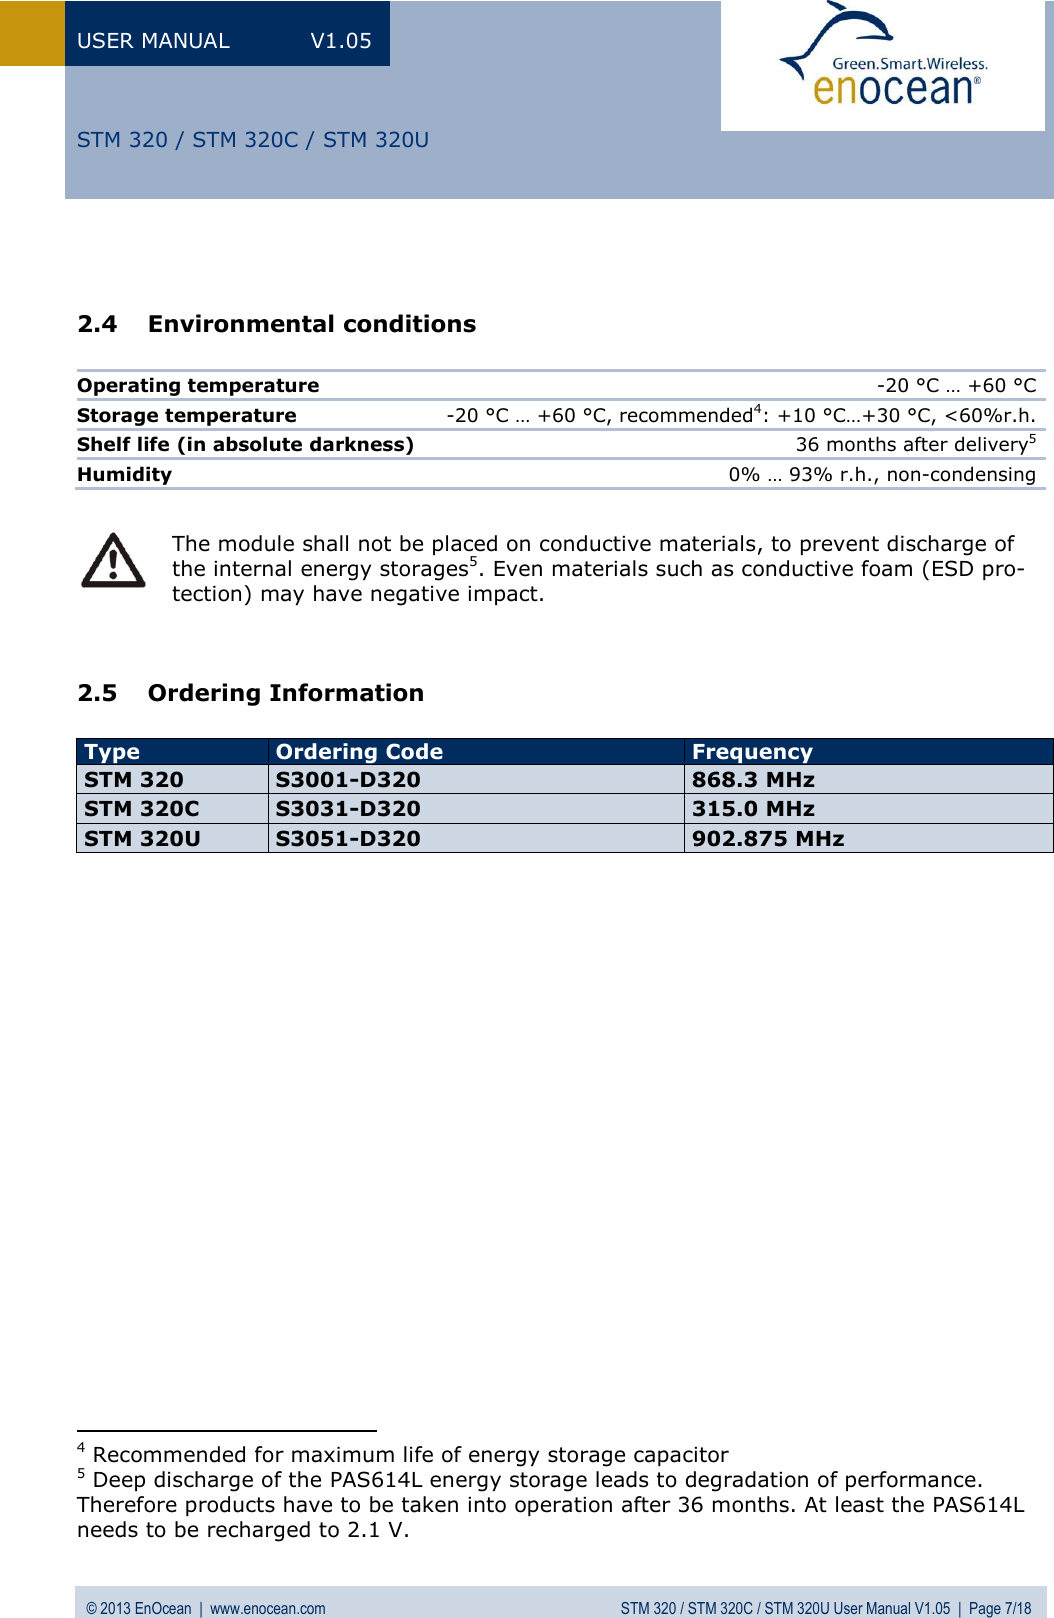 USER MANUAL  V1.05 © 2013 EnOcean  |  www.enocean.com  STM 320 / STM 320C / STM 320U User Manual V1.05  |  Page 7/18   STM 320 / STM 320C / STM 320U   2.4 Environmental conditions  Operating temperature  -20 °C … +60 °C Storage temperature  -20 °C … +60 °C, recommended4: +10 °C…+30 °C, &lt;60%r.h. Shelf life (in absolute darkness) 36 months after delivery5 Humidity 0% … 93% r.h., non-condensing   2.5 Ordering Information  Type Ordering Code Frequency STM 320 S3001-D320 868.3 MHz STM 320C S3031-D320 315.0 MHz STM 320U S3051-D320 902.875 MHz                                                                  4 Recommended for maximum life of energy storage capacitor 5 Deep discharge of the PAS614L energy storage leads to degradation of performance. Therefore products have to be taken into operation after 36 months. At least the PAS614L needs to be recharged to 2.1 V.  The module shall not be placed on conductive materials, to prevent discharge of the internal energy storages5. Even materials such as conductive foam (ESD pro-tection) may have negative impact.  